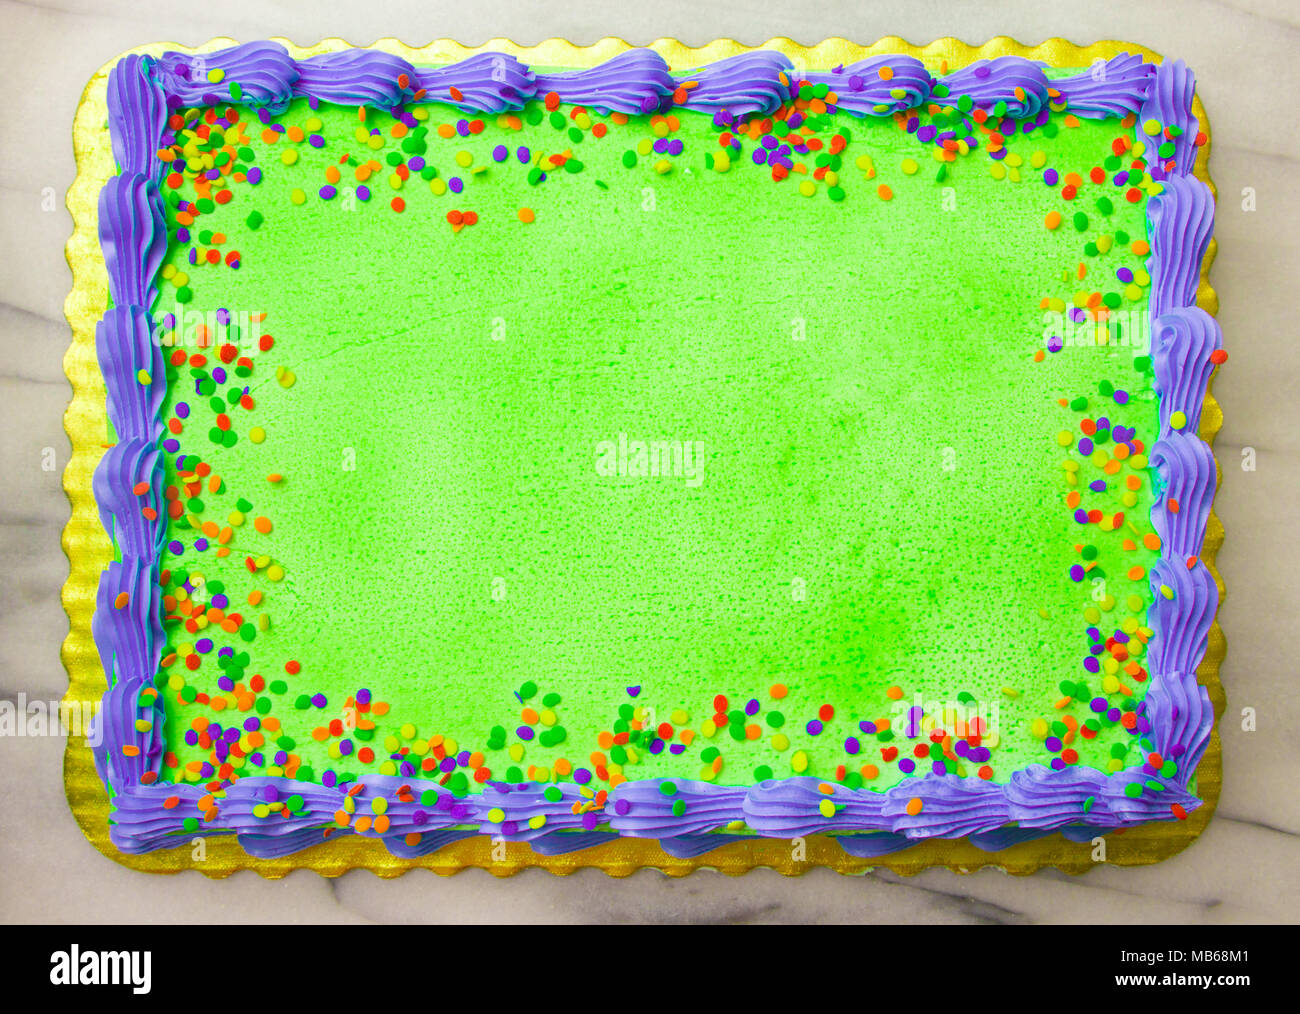 Blank Cake - Add your own writting or message Stock Photo